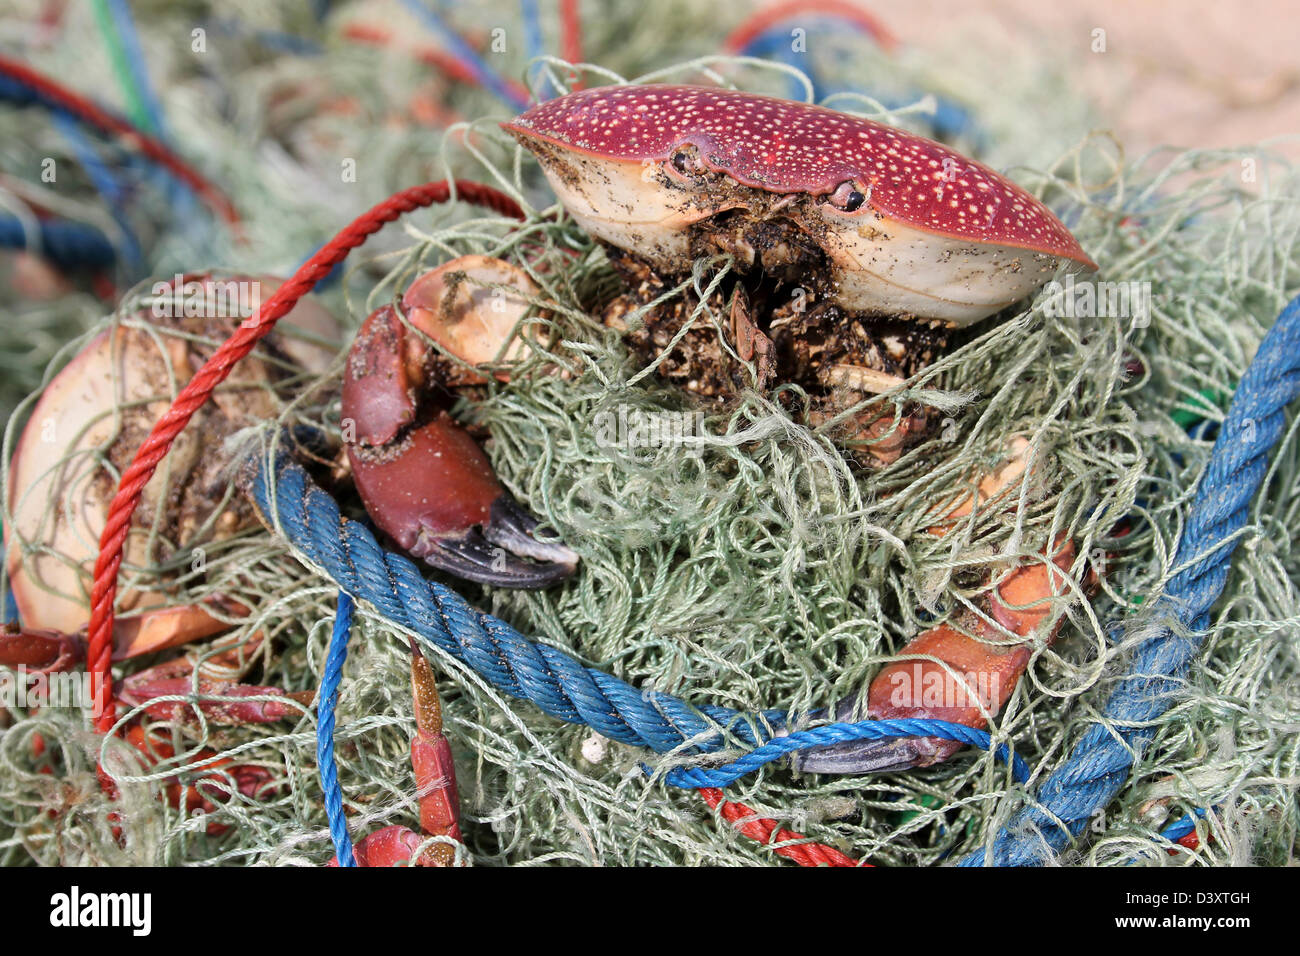 Dead Crab Caught Up In Fishing Net Stock Photo